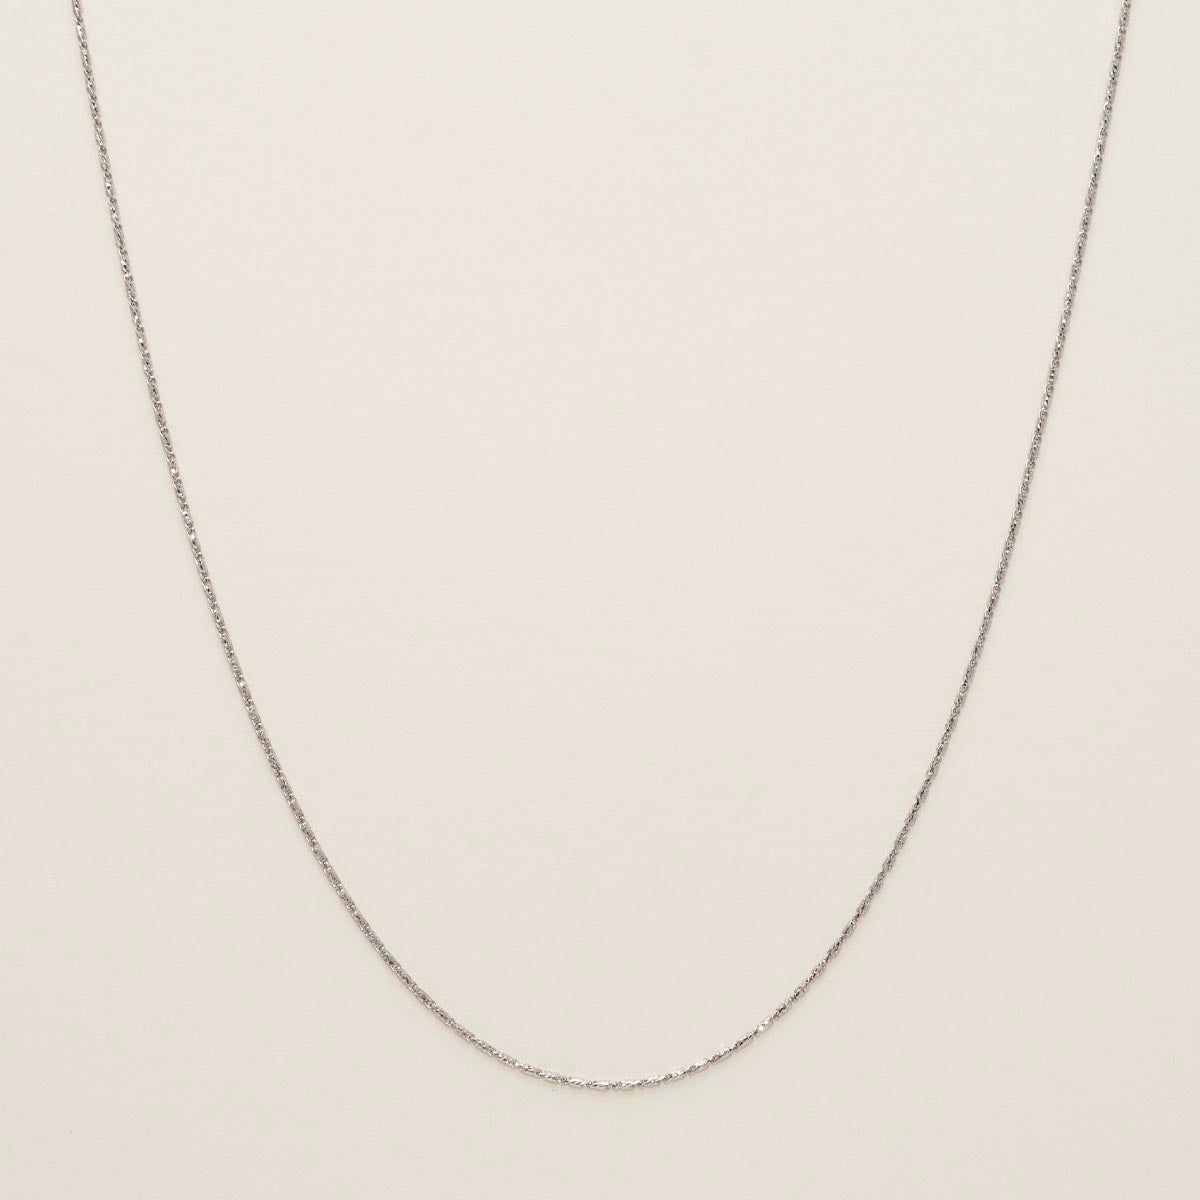 Raso Chain in 14kt White Gold (18 inches and 1mm wide)